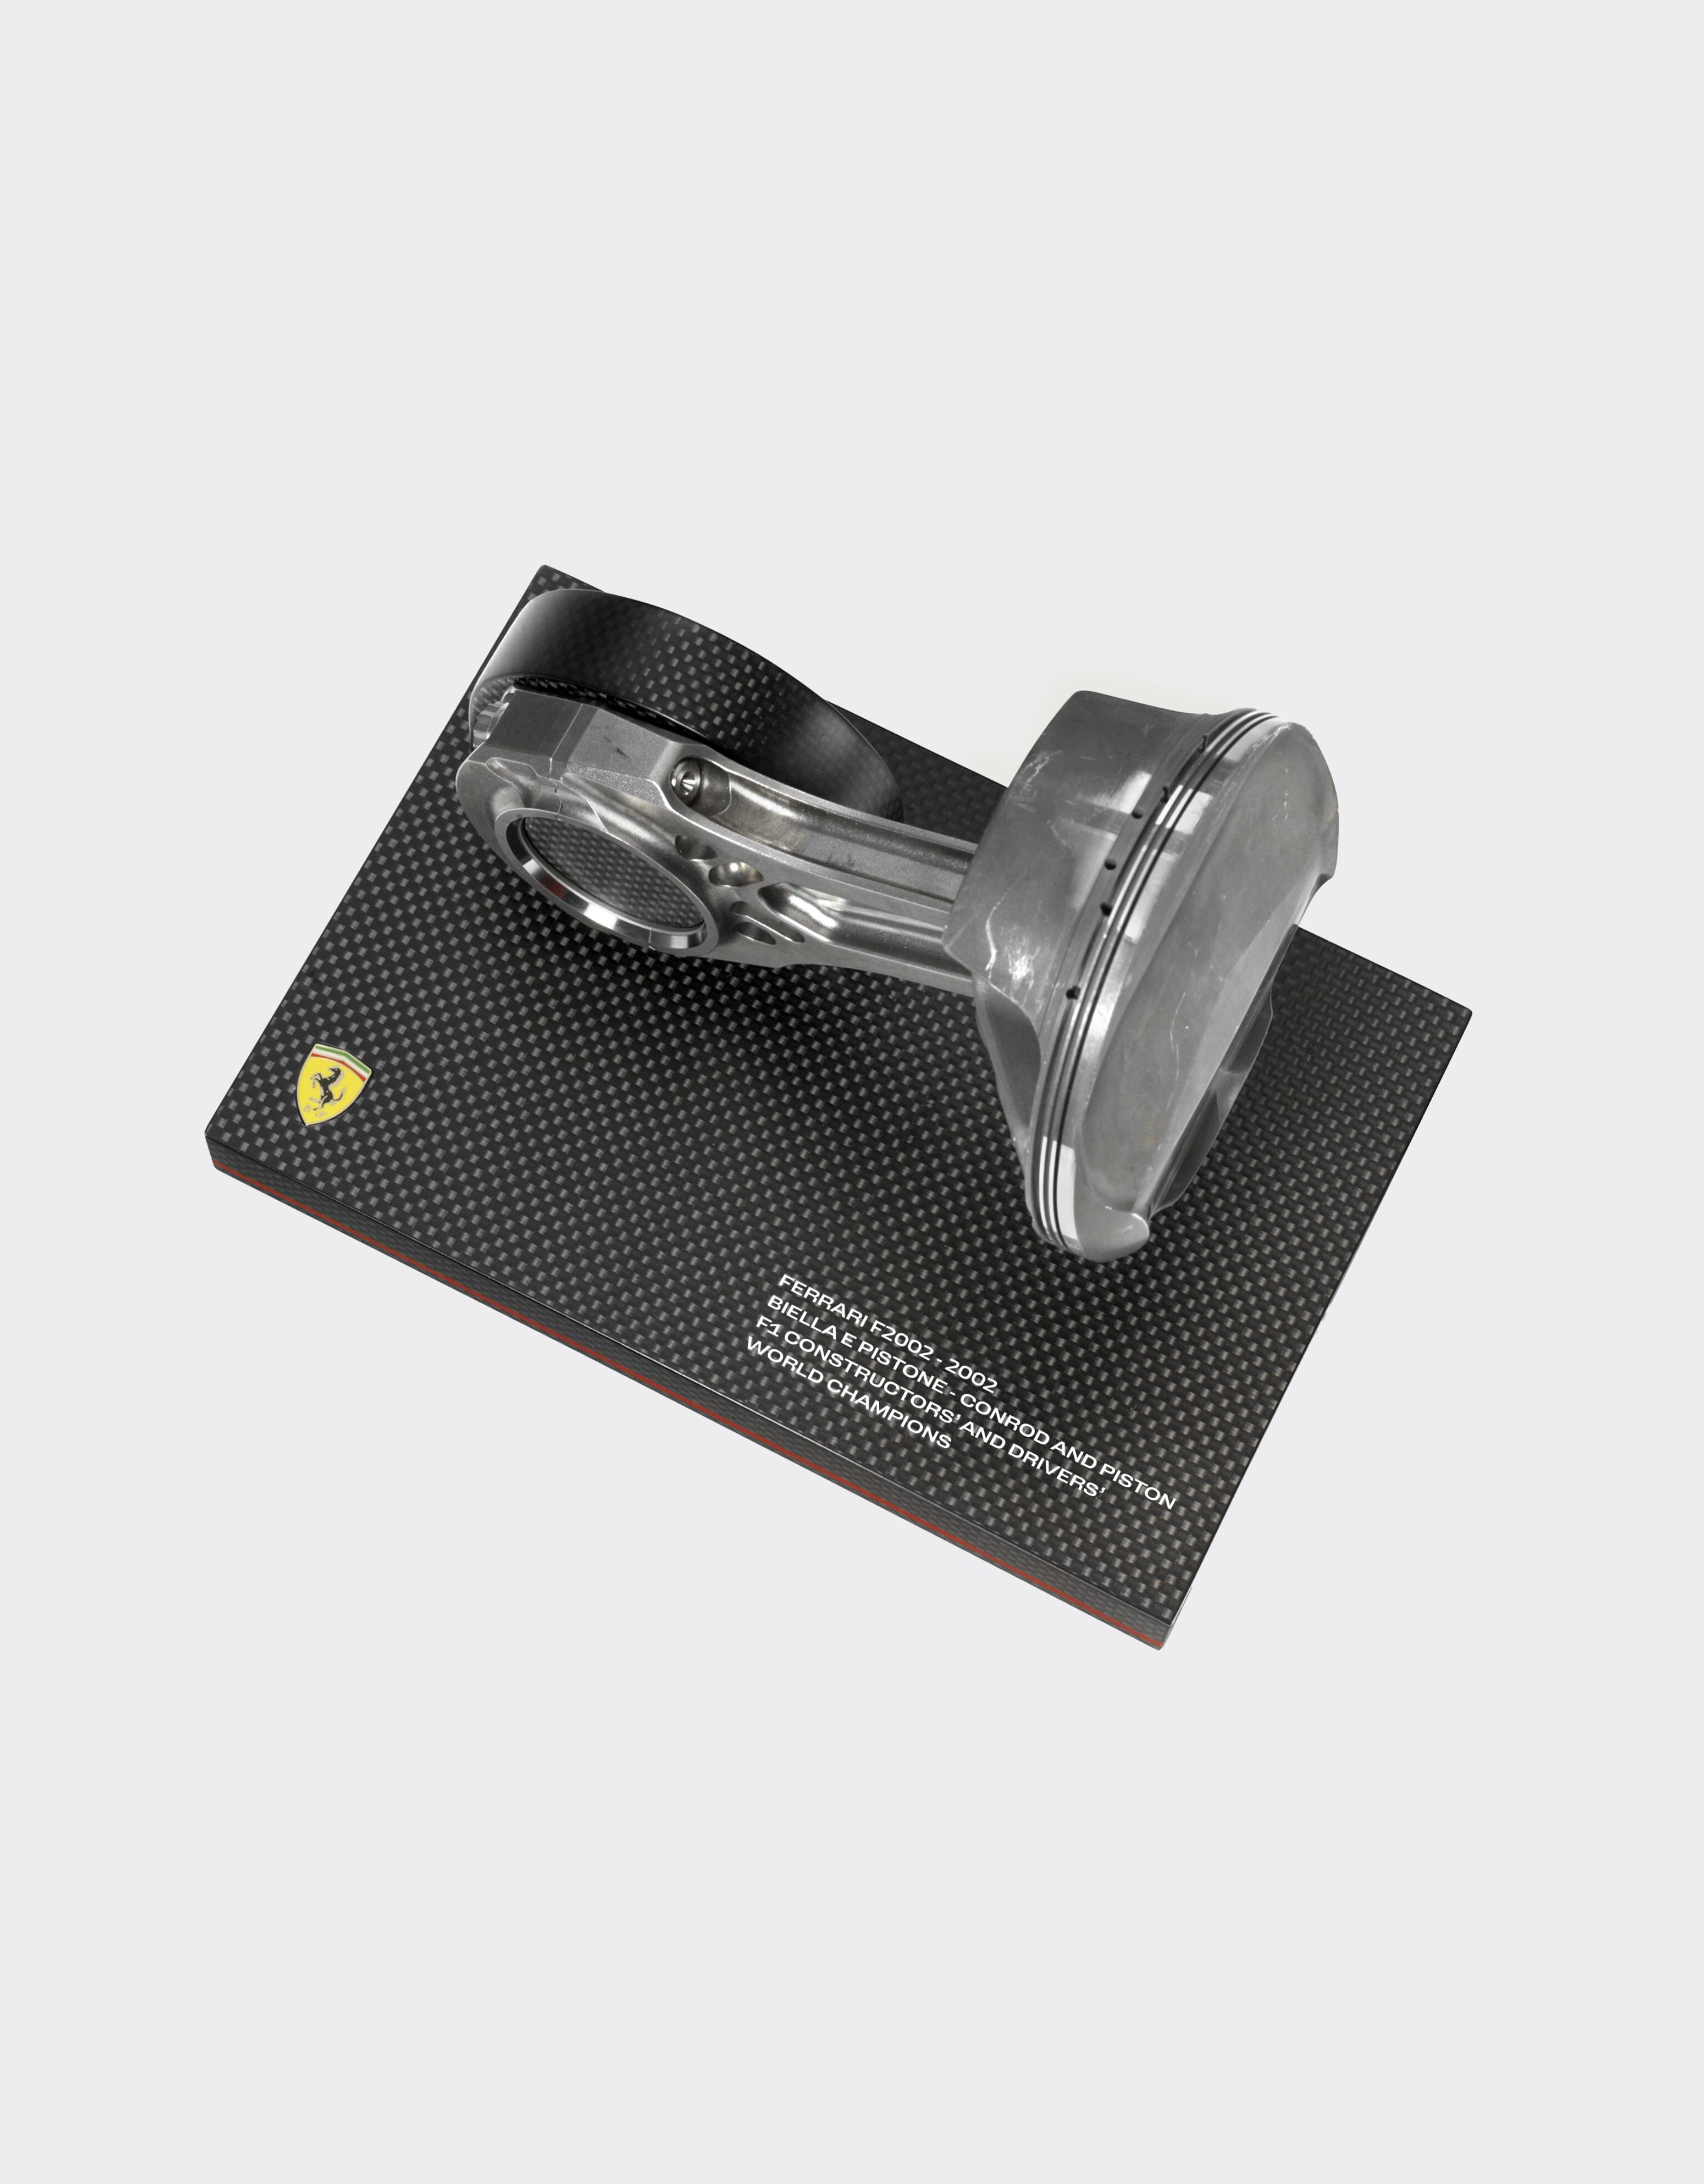 Ferrari Original connecting rod and piston set from the F2002, winner of the 2002 Constructors’ and Drivers’ Championships Black 48109f